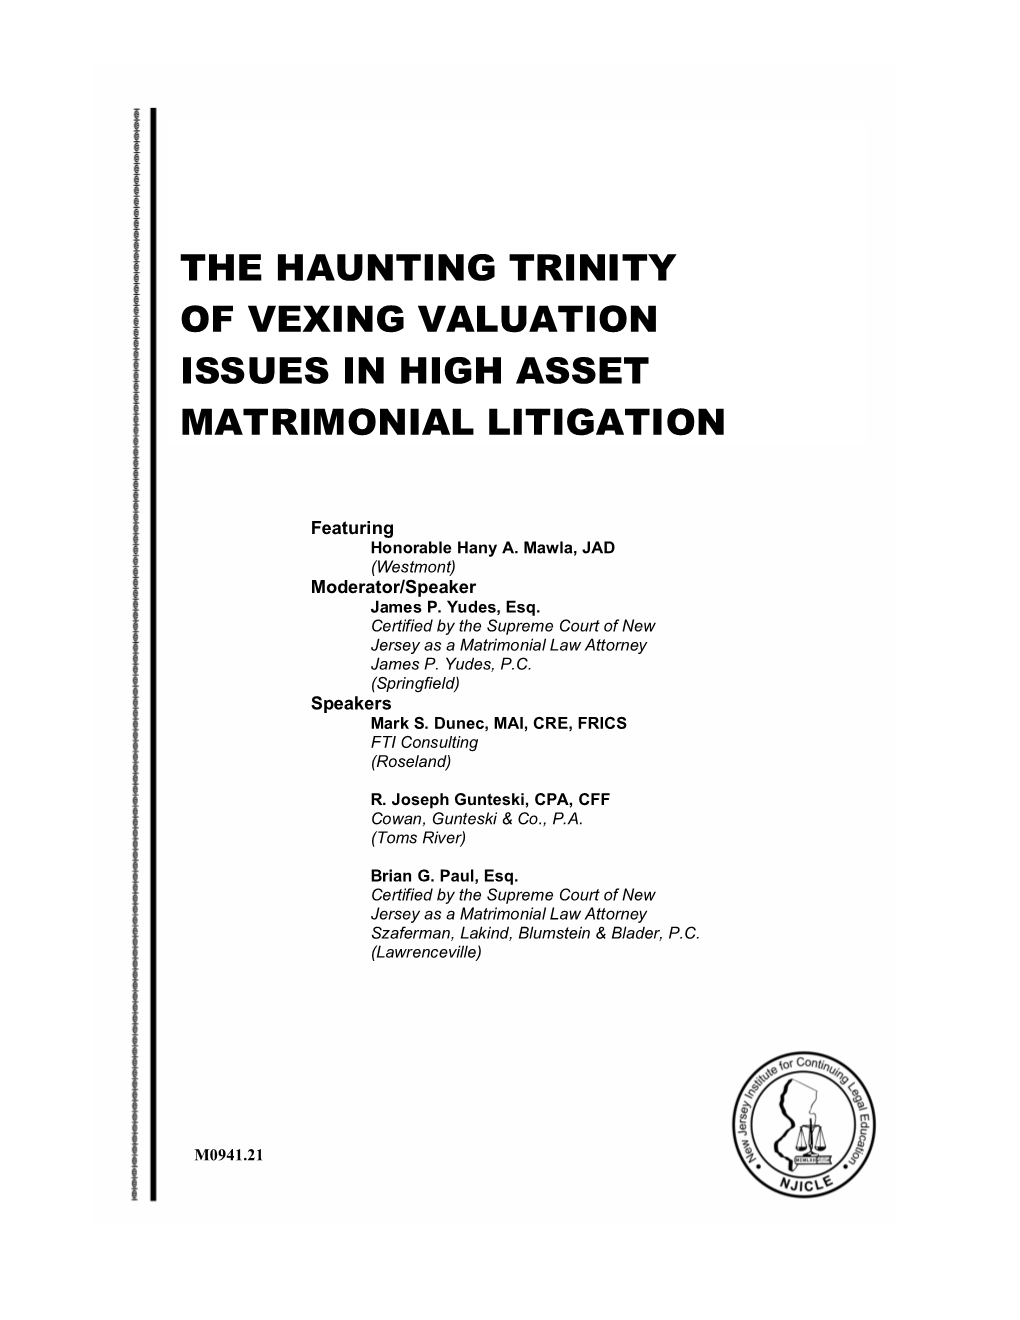 The Haunting Trinity of Vexing Valuation Issues in High Asset Matrimonial Litigation